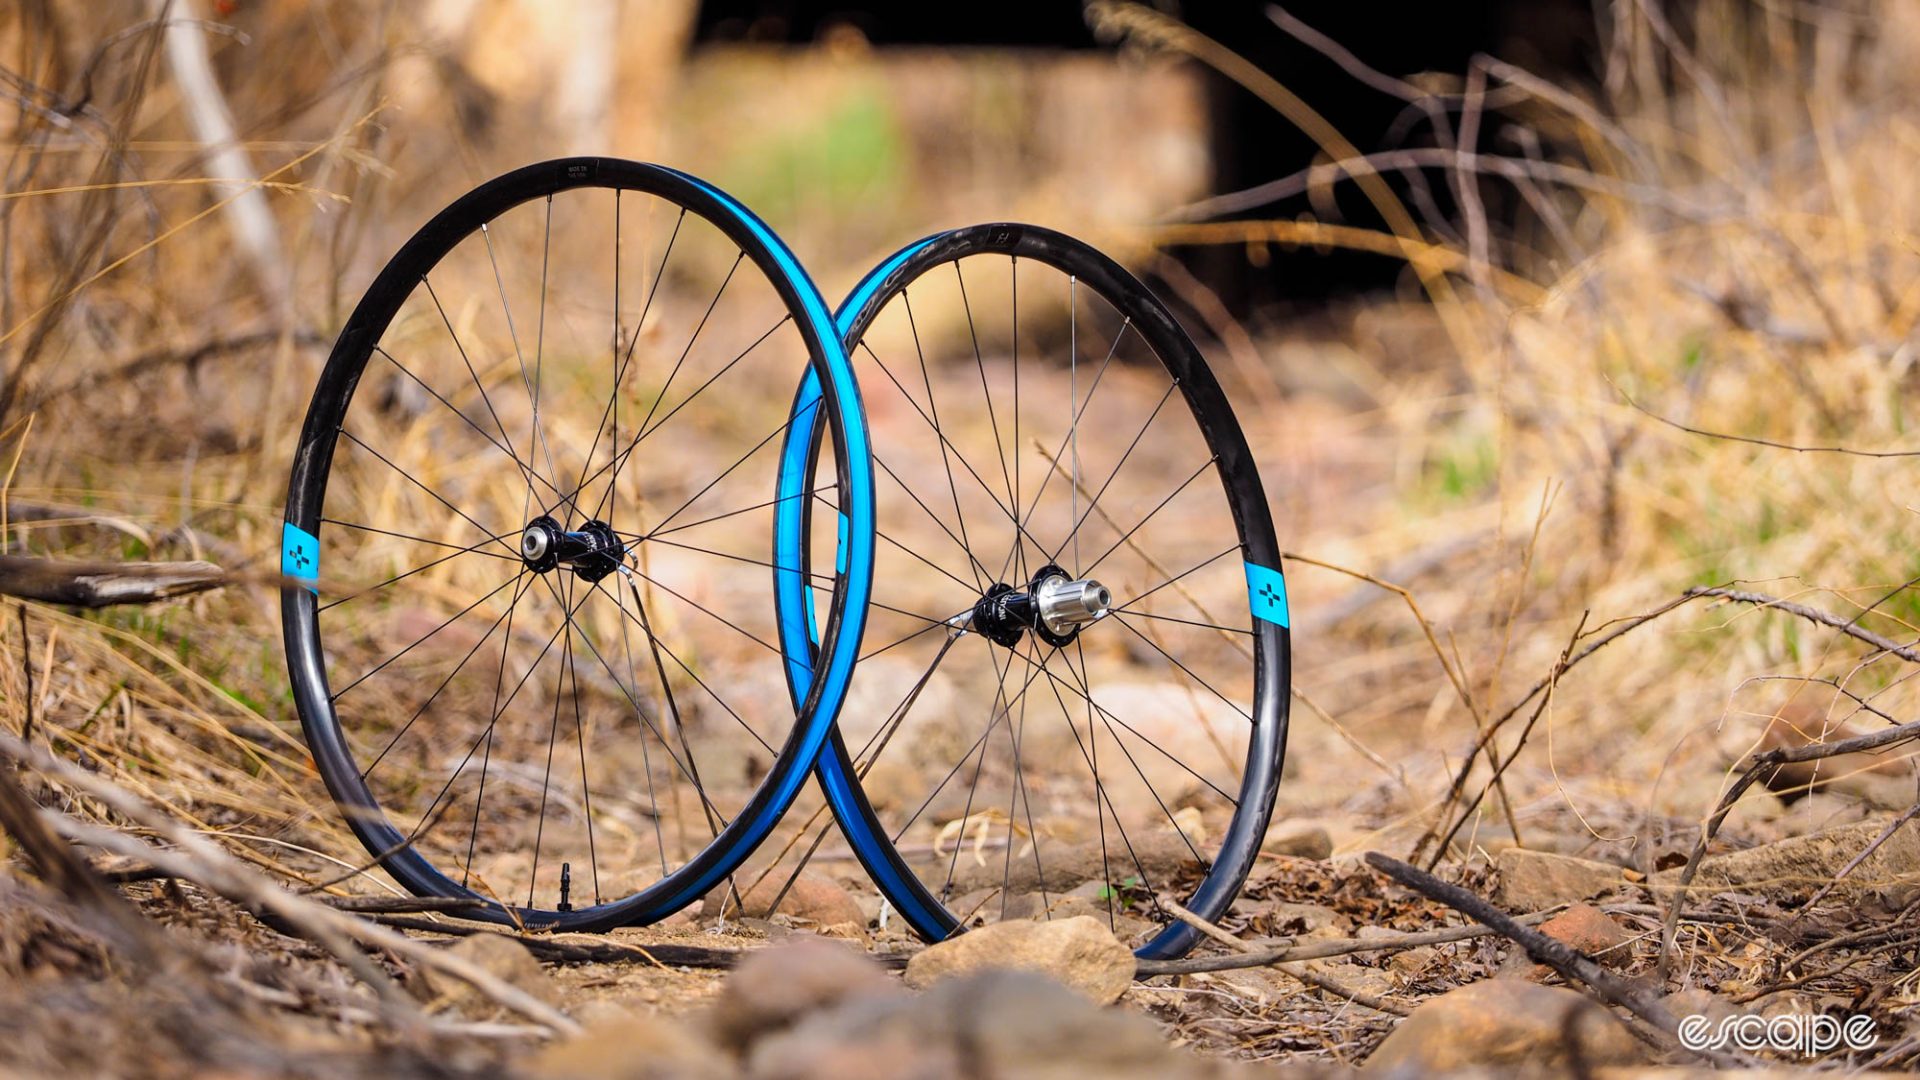 The Perfect Tubeless valve - Pure Gravel